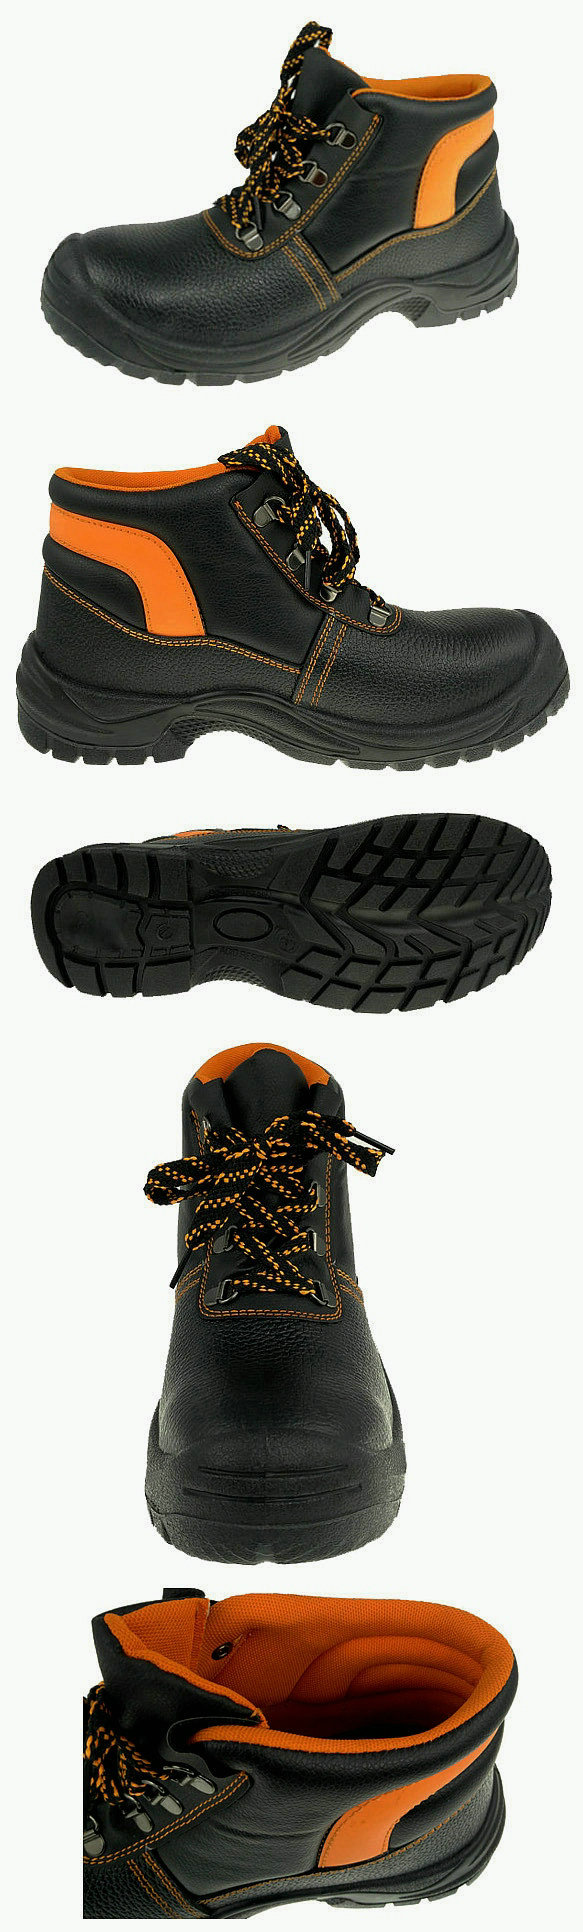 Steel Toe and Midsole Safety Shoes